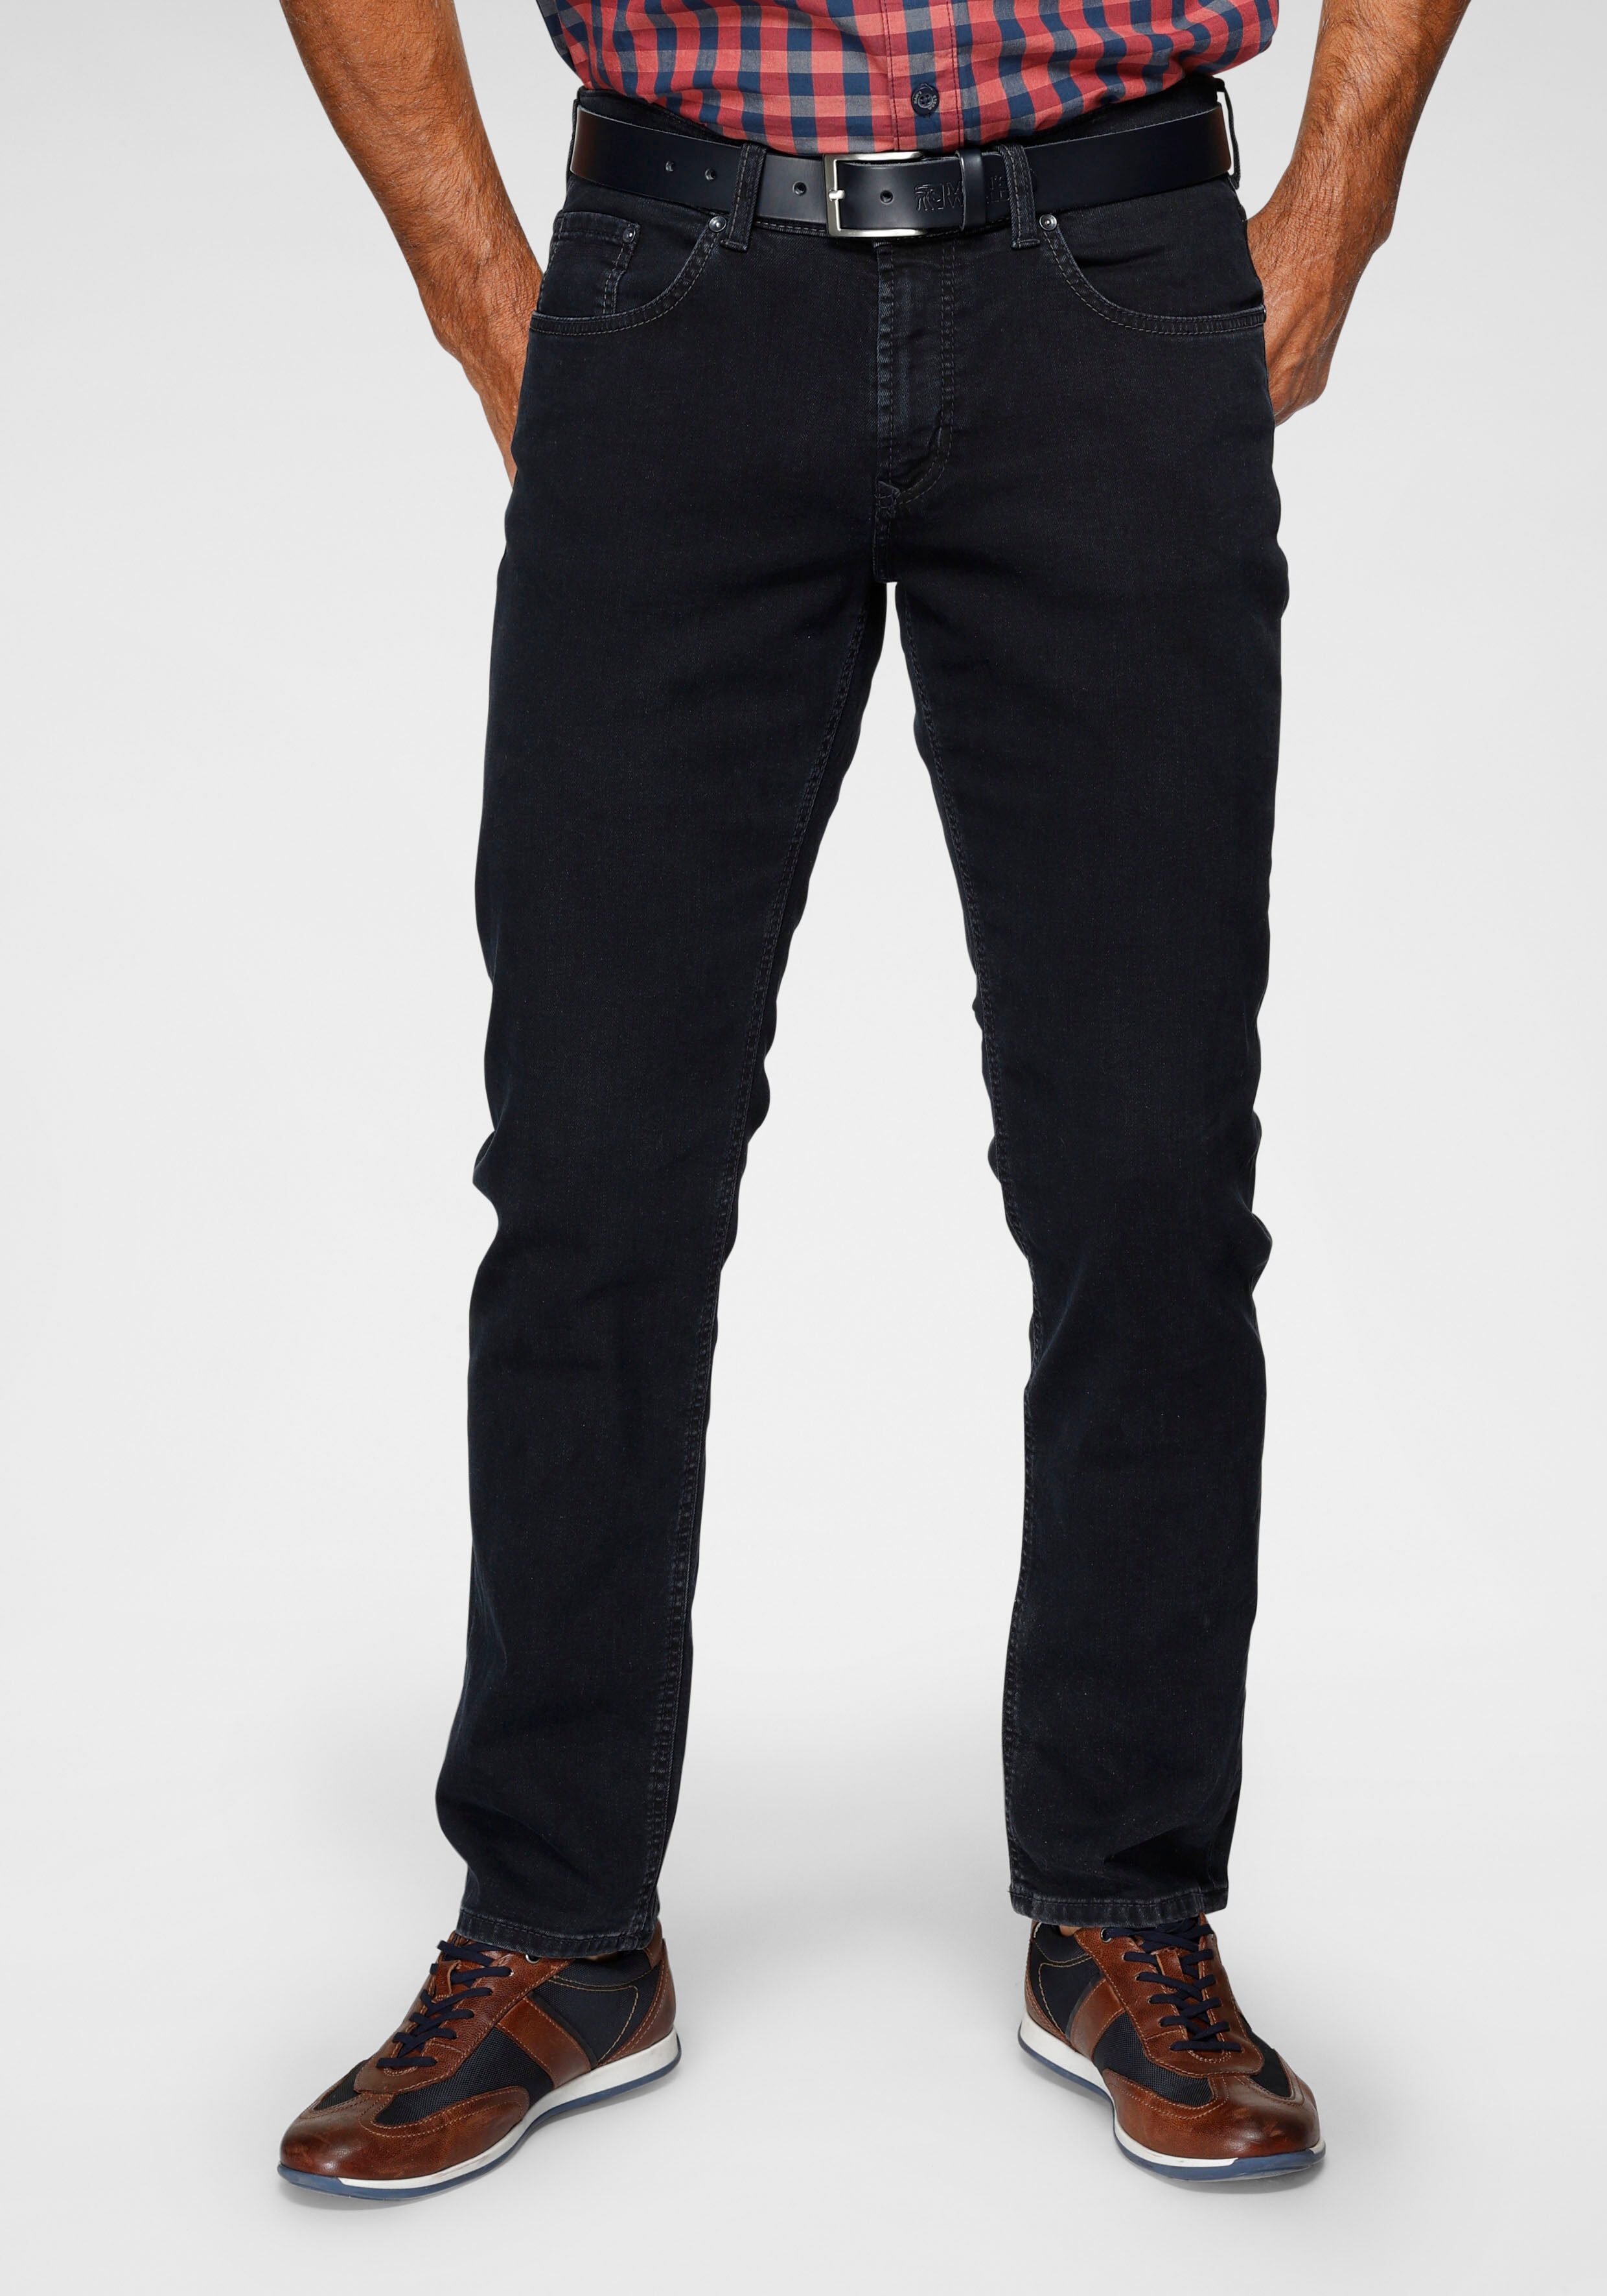 Pioneer Authentic Jeans Straight-Jeans »Eric« blau  31 32 33 34 36 38 40 42